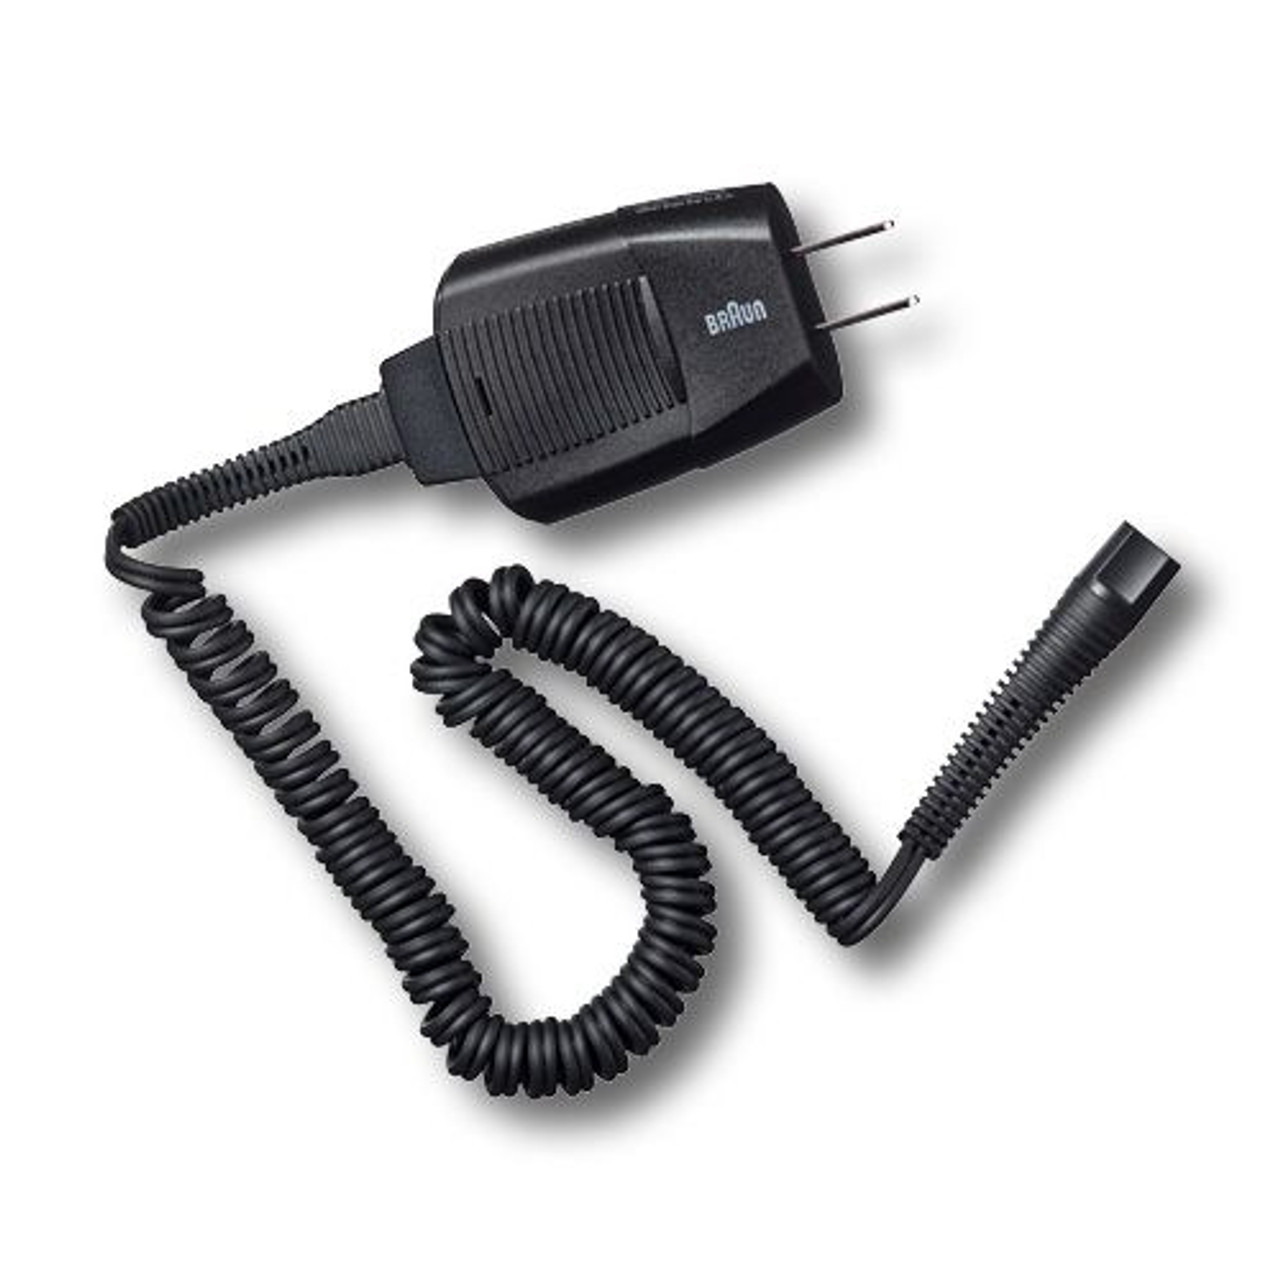 Braun Shaver Charger Cord